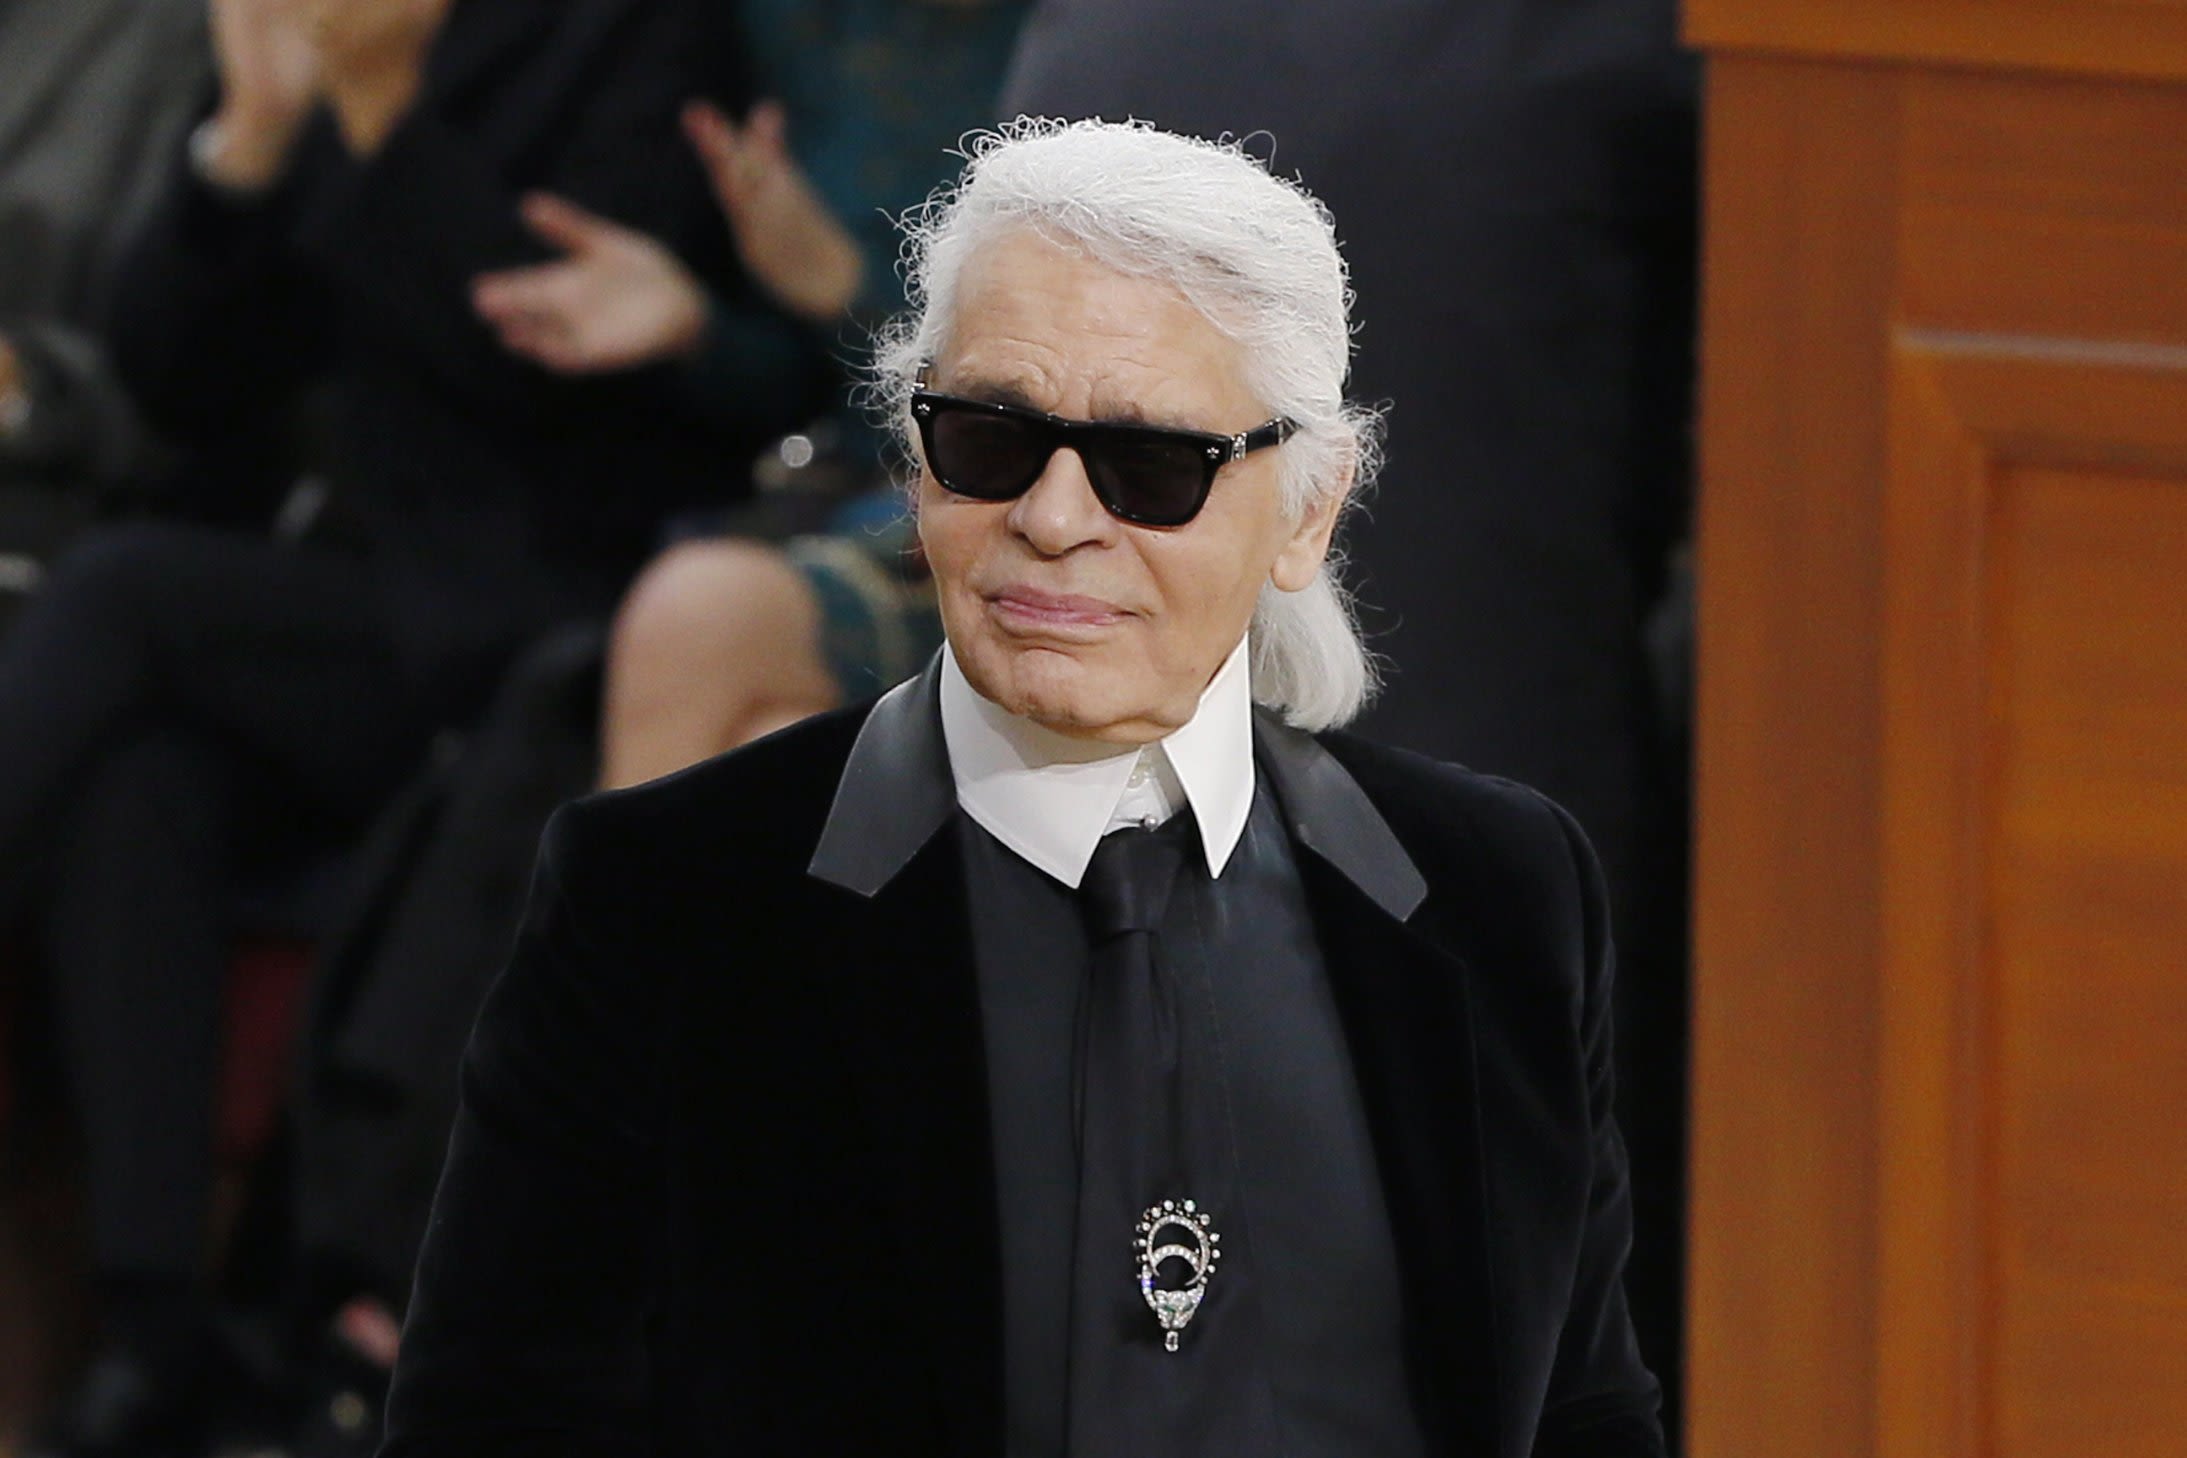 Karl Lagerfeld: Behind the mask - BBC Culture